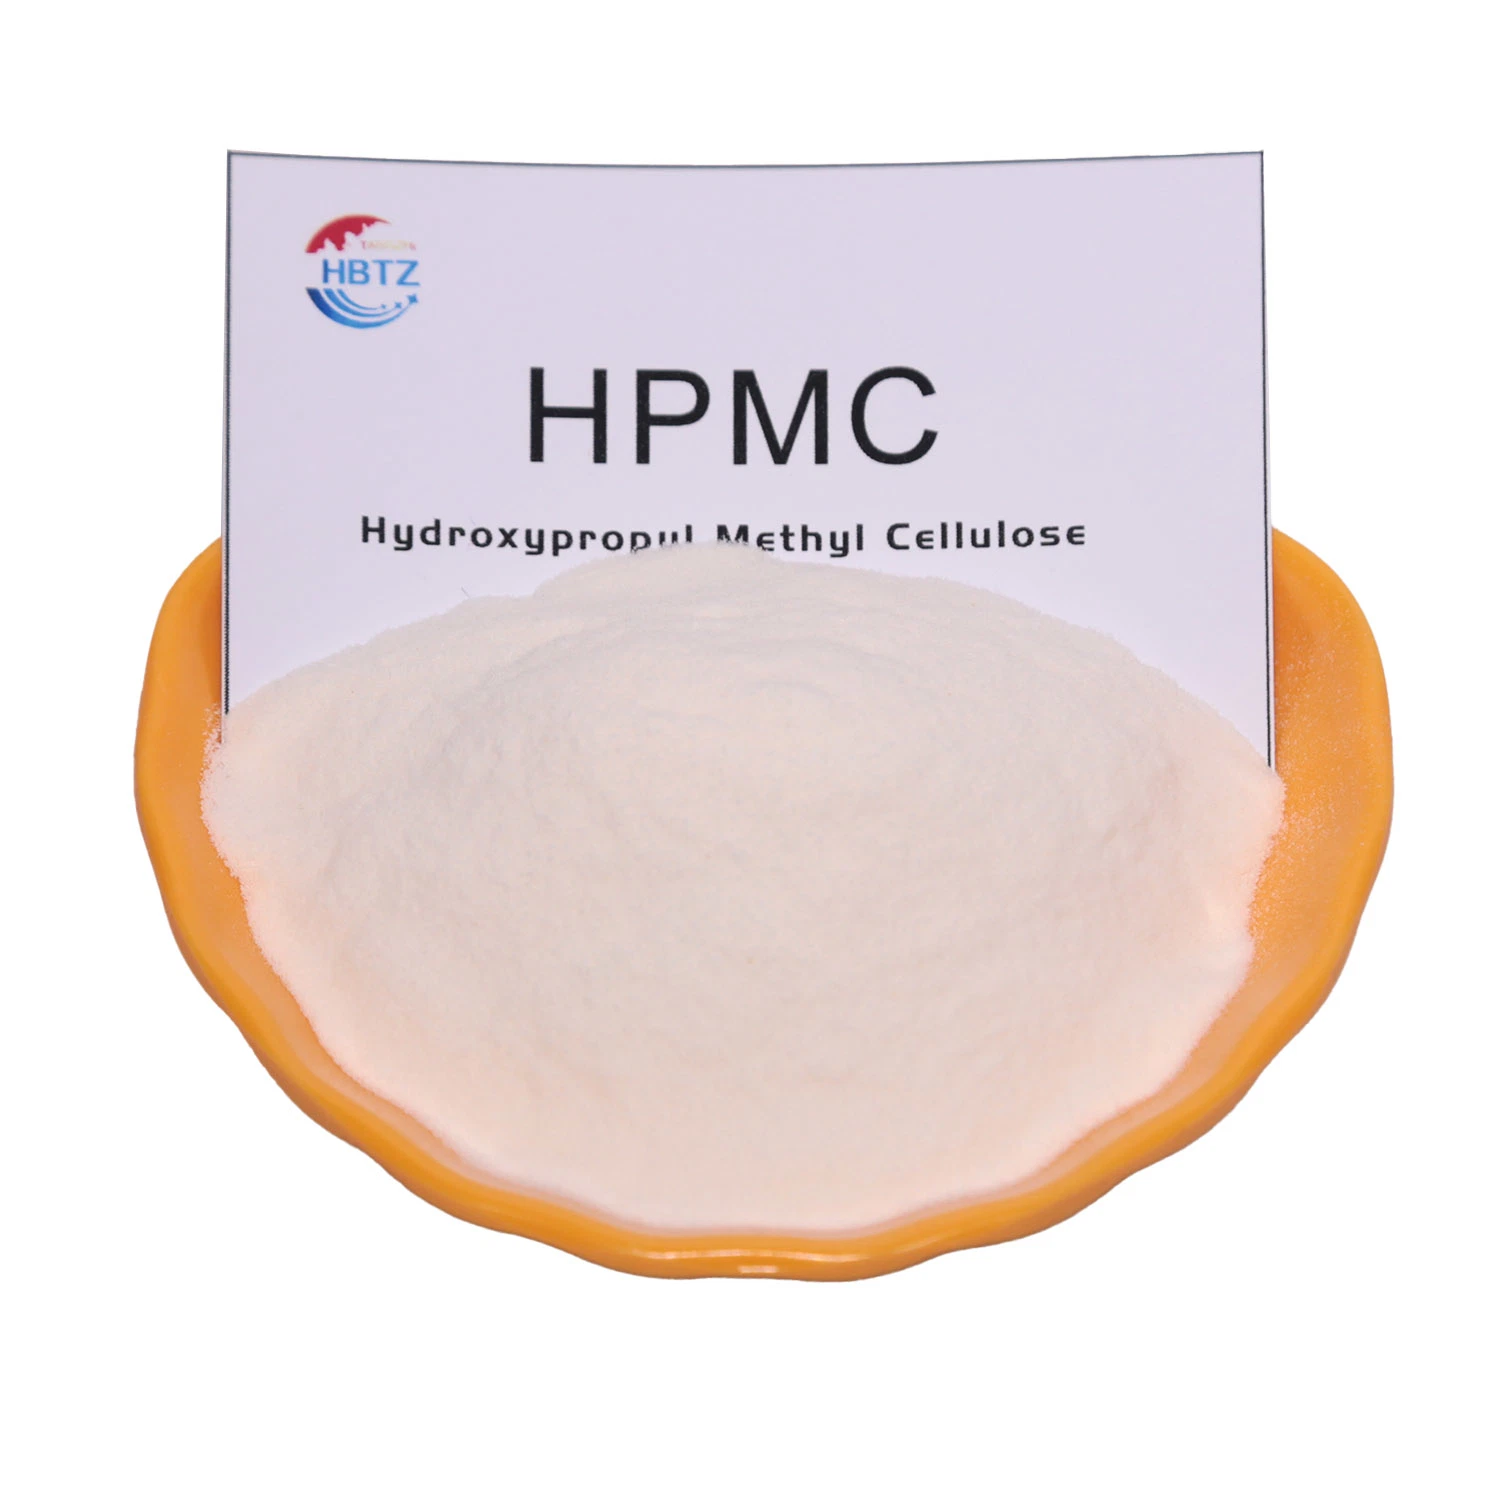 Tile Adhesive Hydroxypropyl Methyl Cellulose HPMC for Chemical Grade Industrial